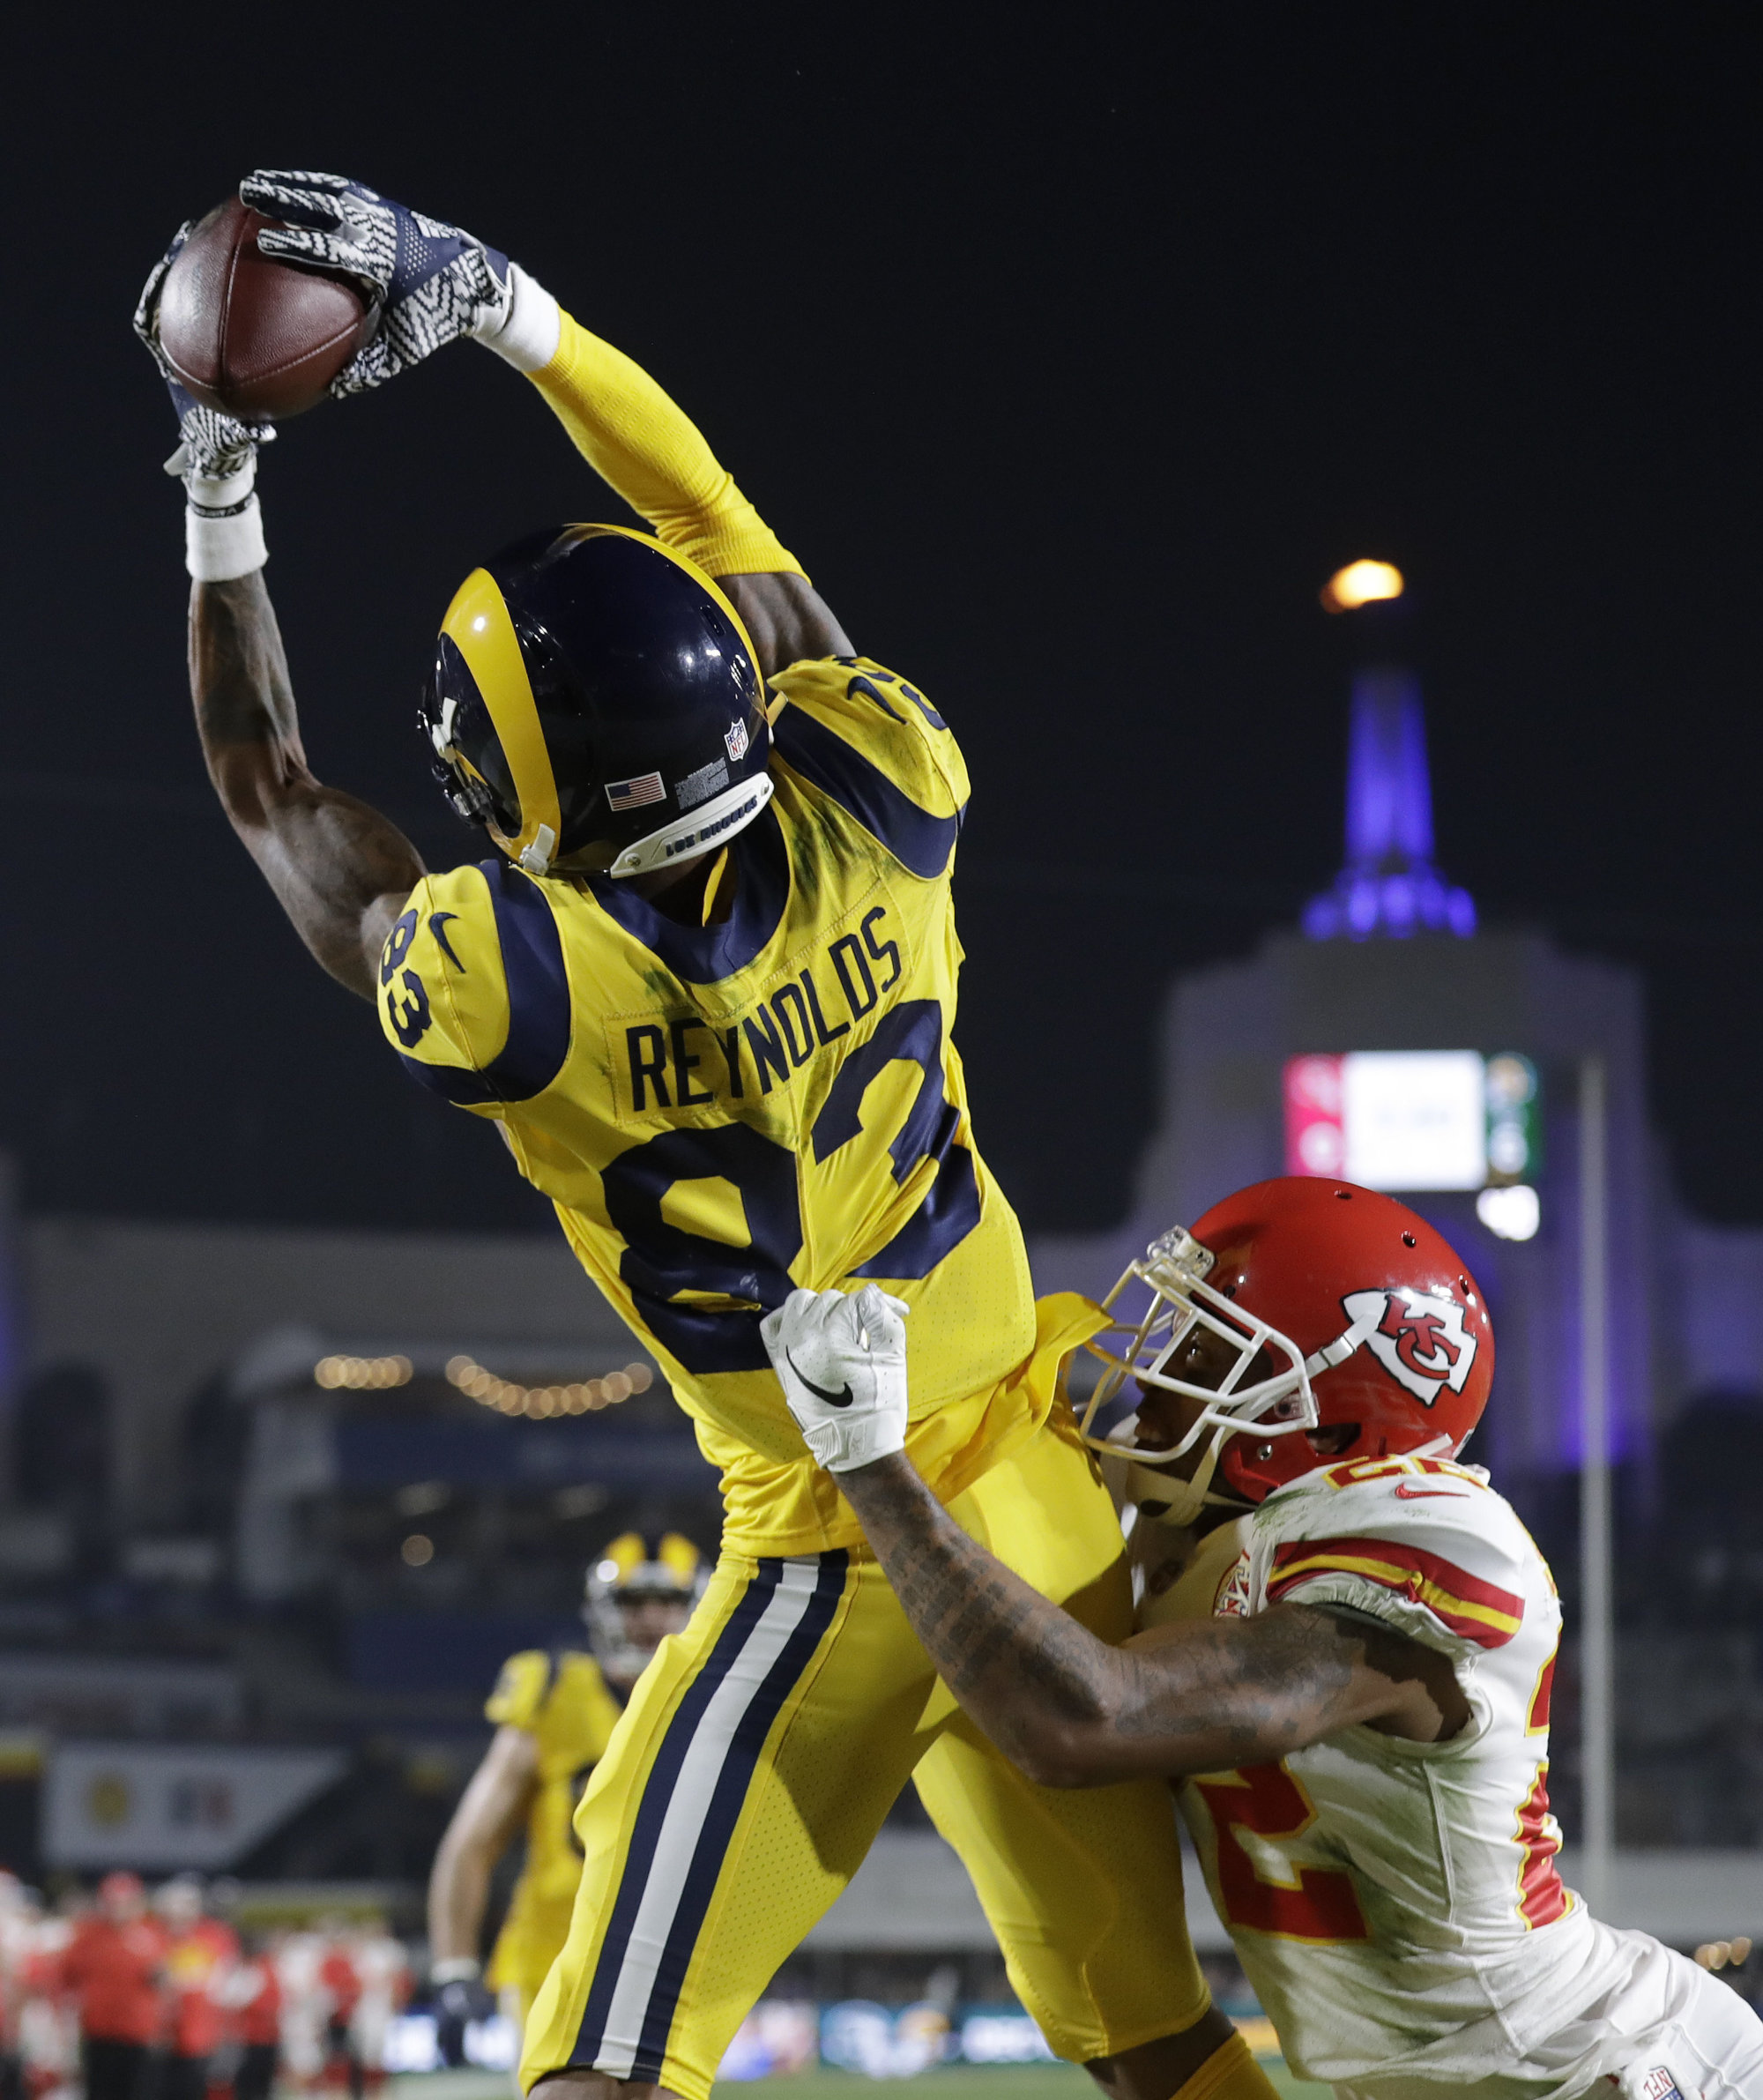 Los Angeles Rams wide receiver Josh Reynolds (83) catches a touchdown pass over Kansas City Chiefs defensive back Orlando Scandrick, lower right, during the first half of an NFL football game Monday, Nov. 19, 2018, in Los Angeles. (AP Photo/Marcio Jose Sanchez)